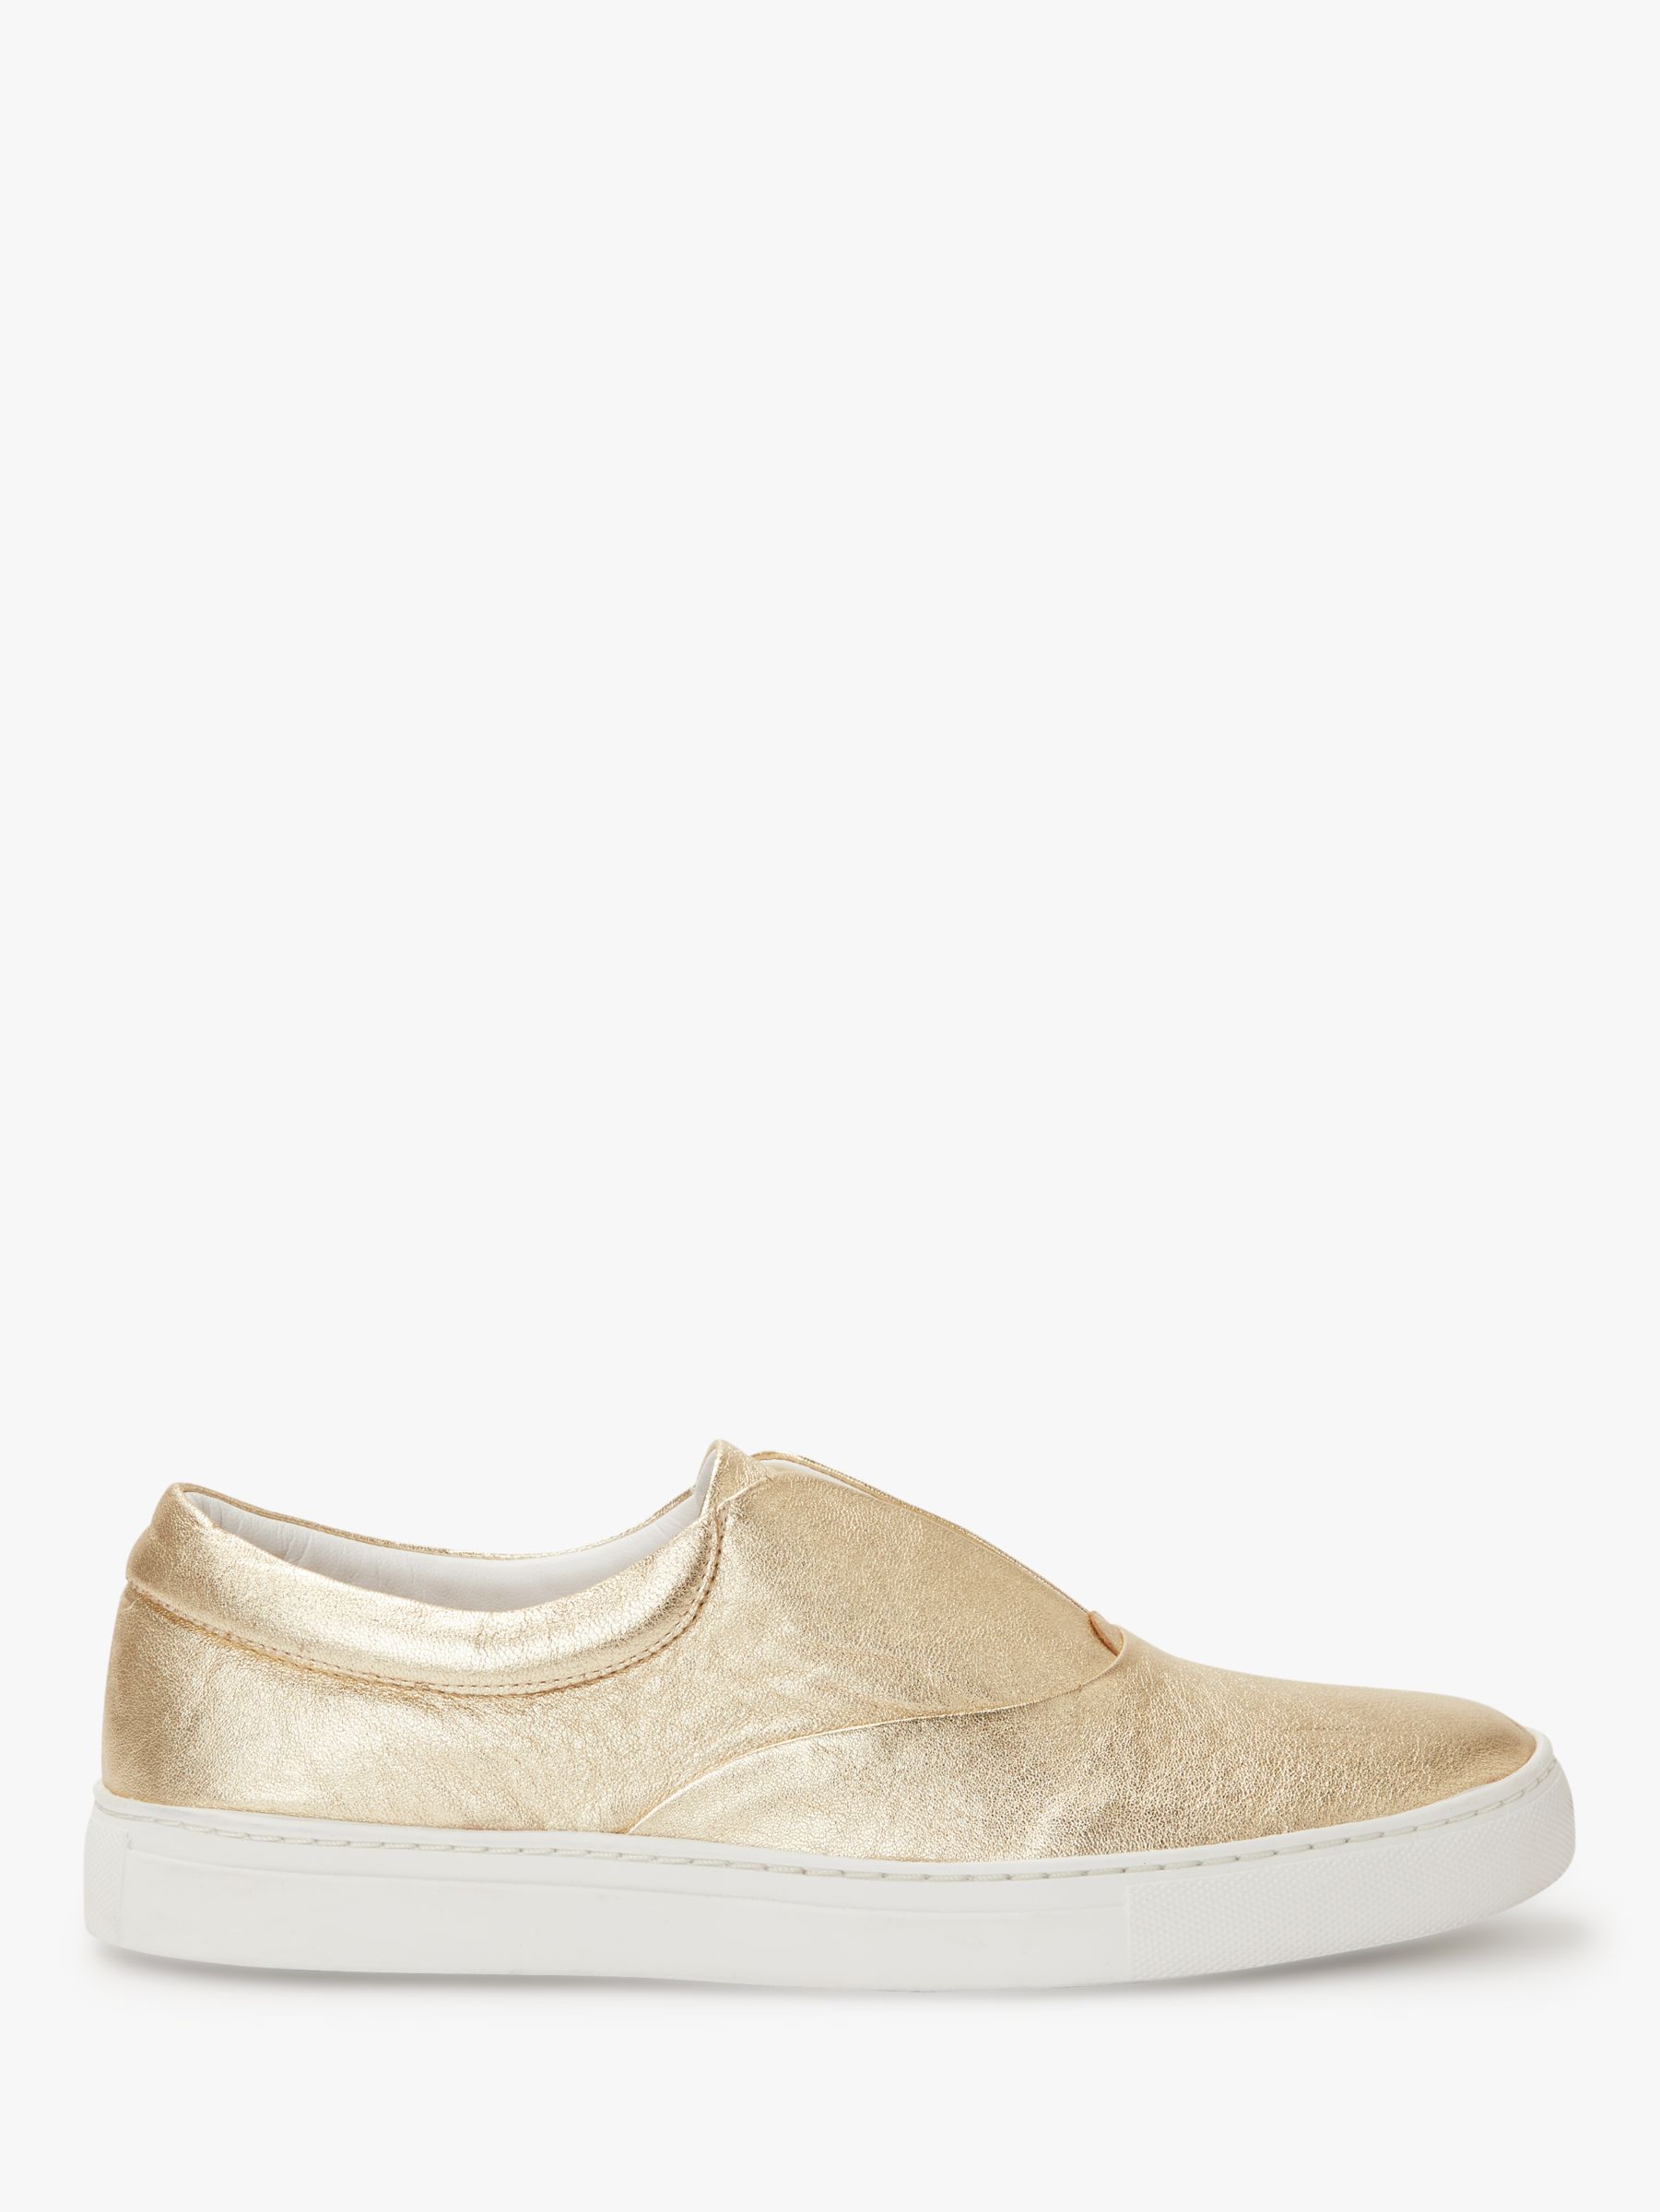 Boden Metallic Slip On Trainers, Gold Leather